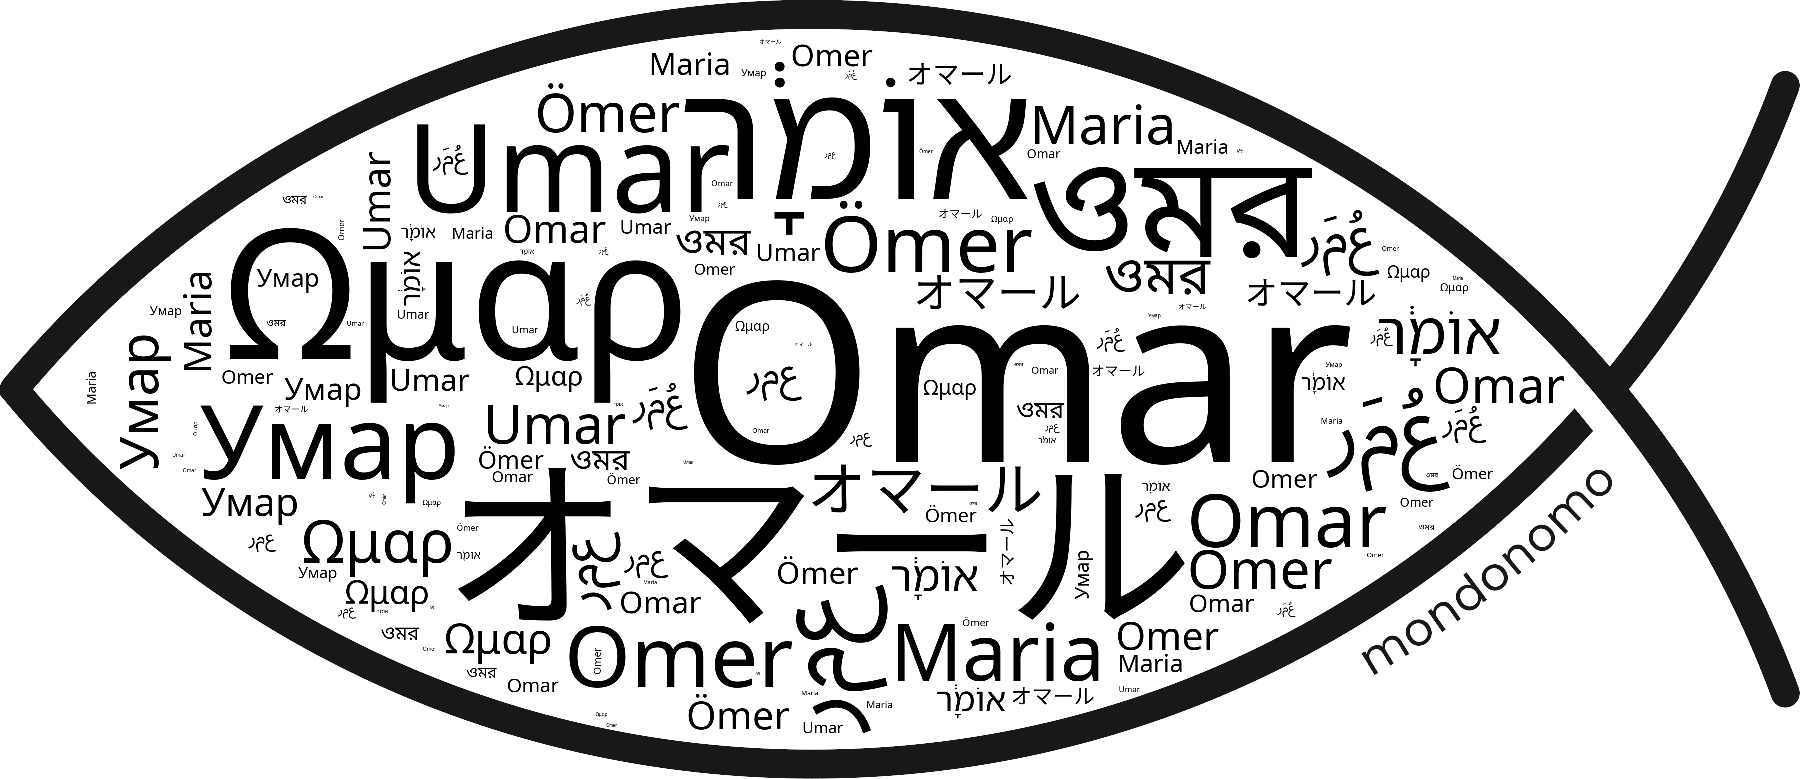 Name Omar in the world's Bibles